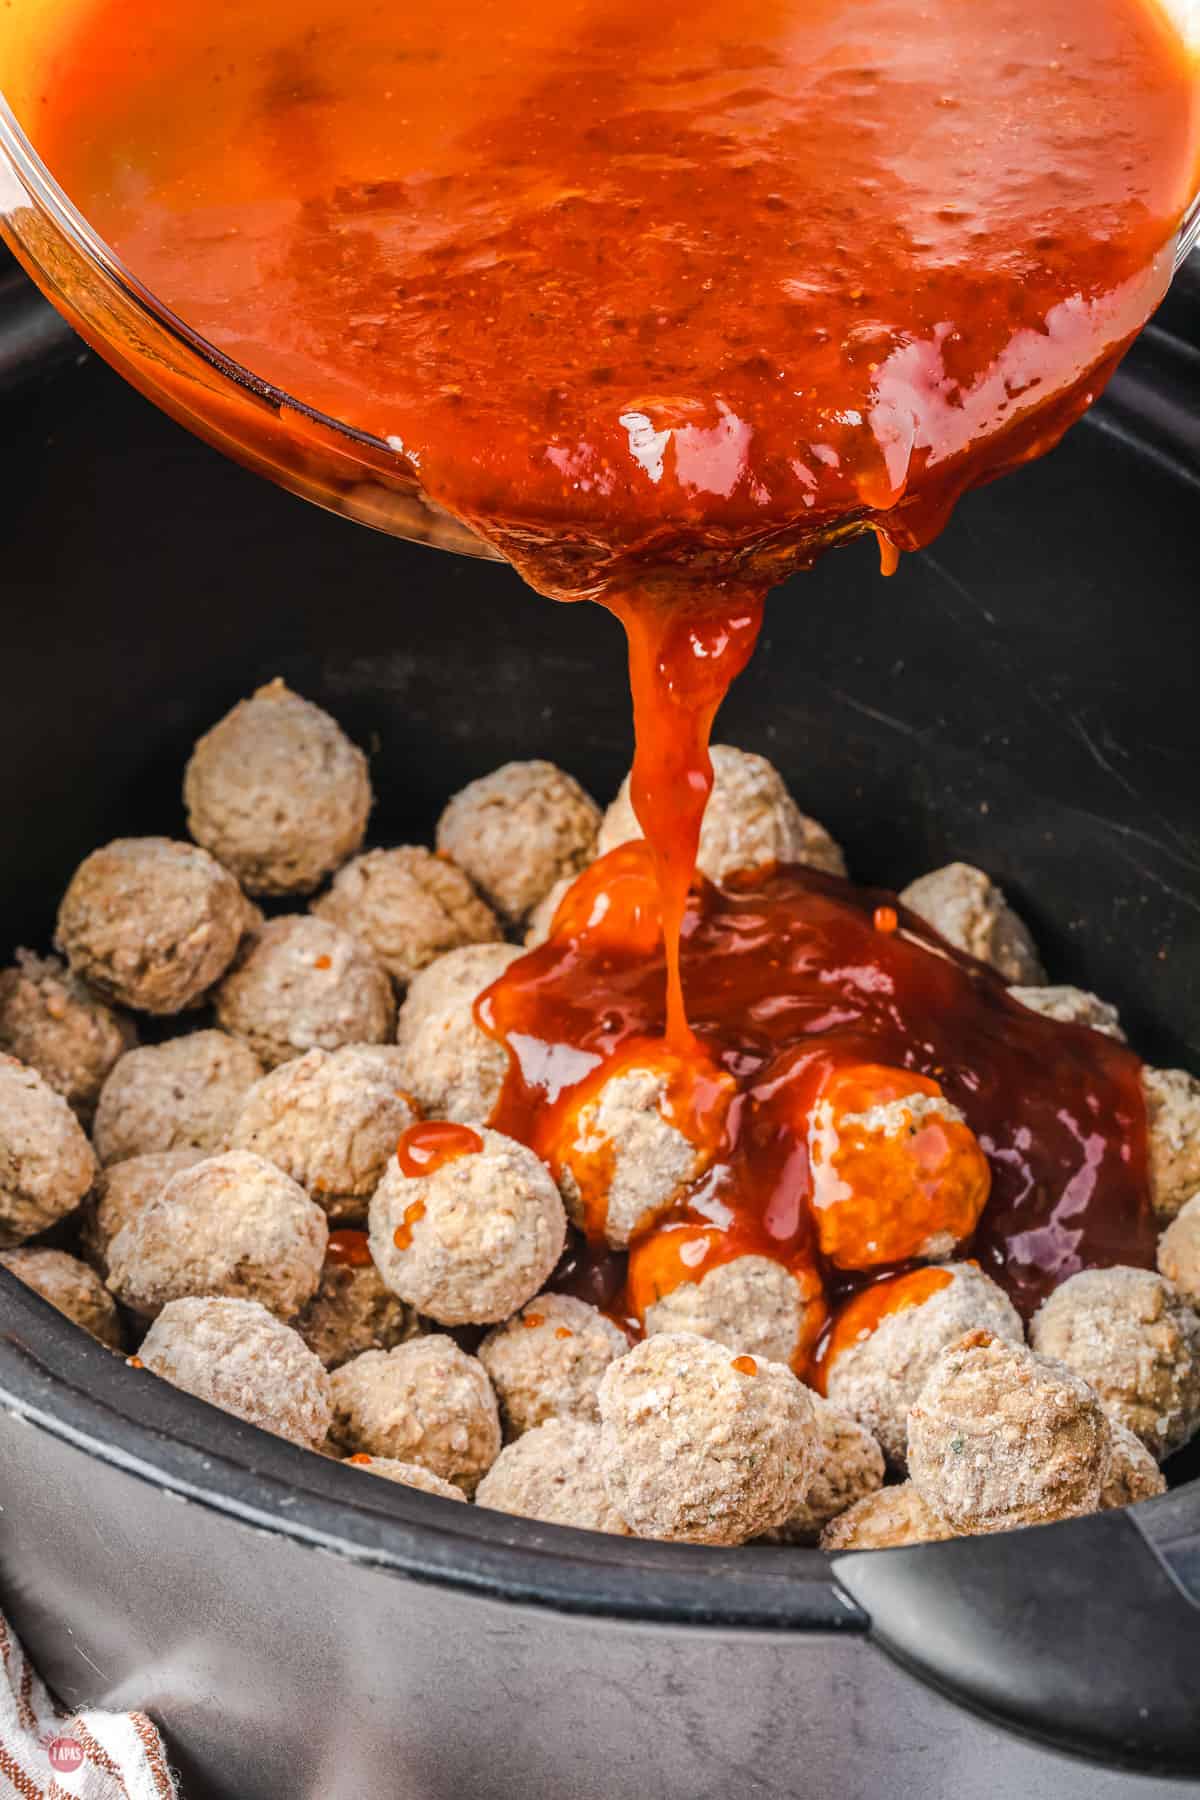 sauce pouring over meatballs